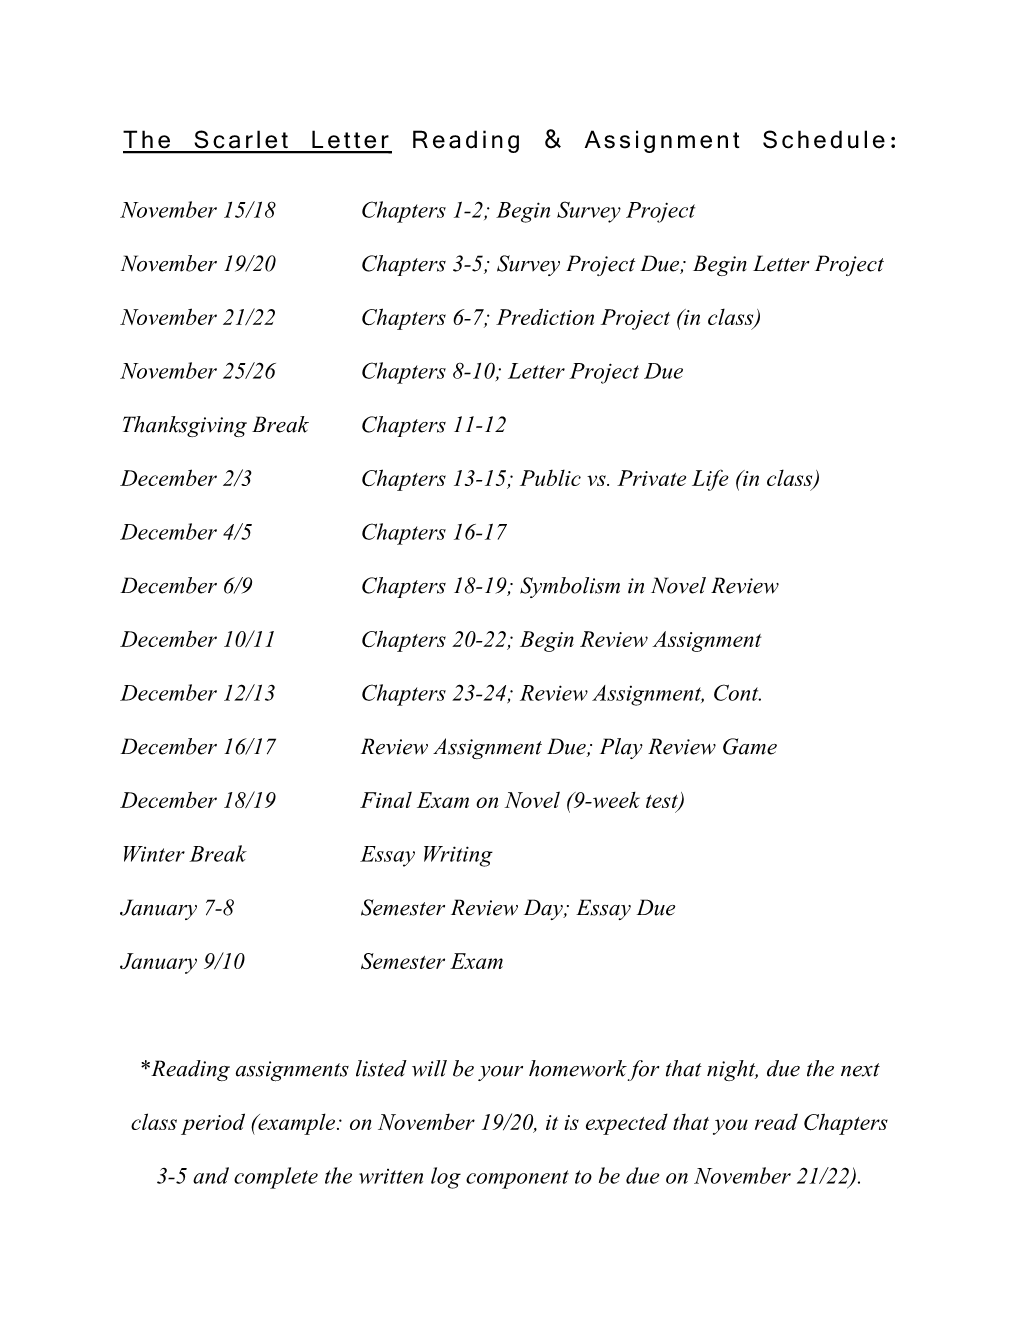 The Scarlet Letterreading & Assignment Schedule